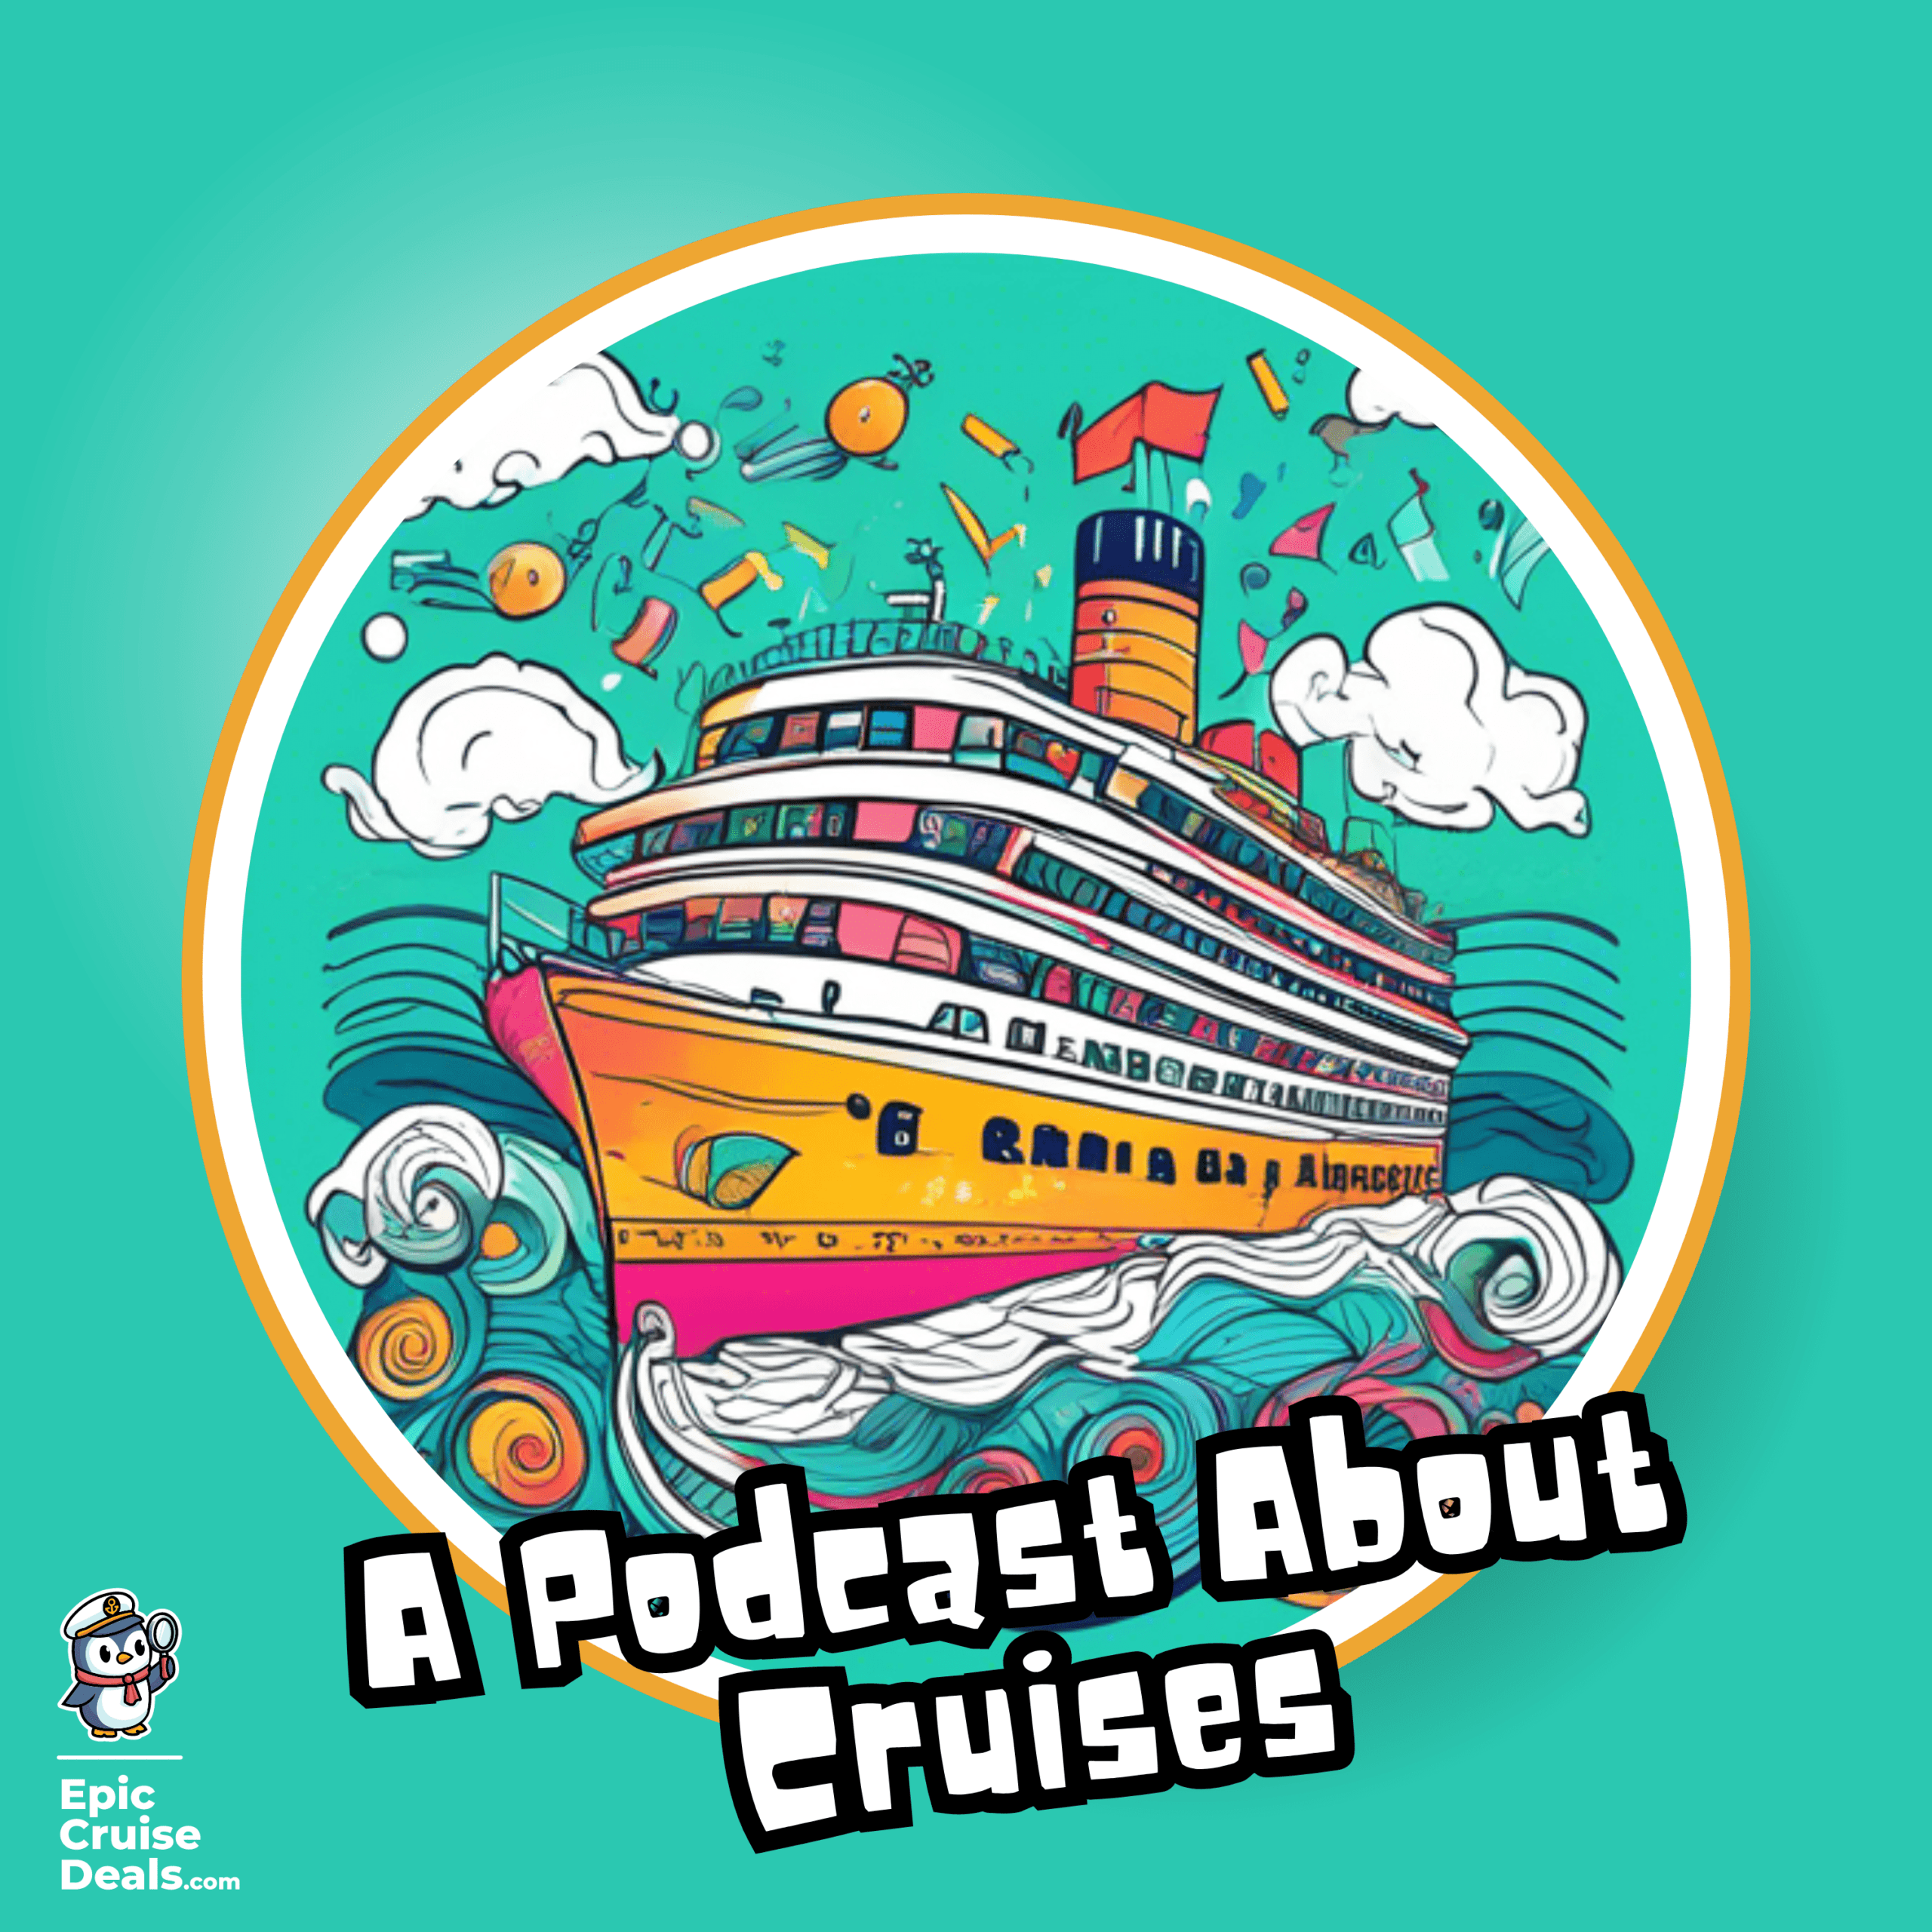 A podcast about cruises